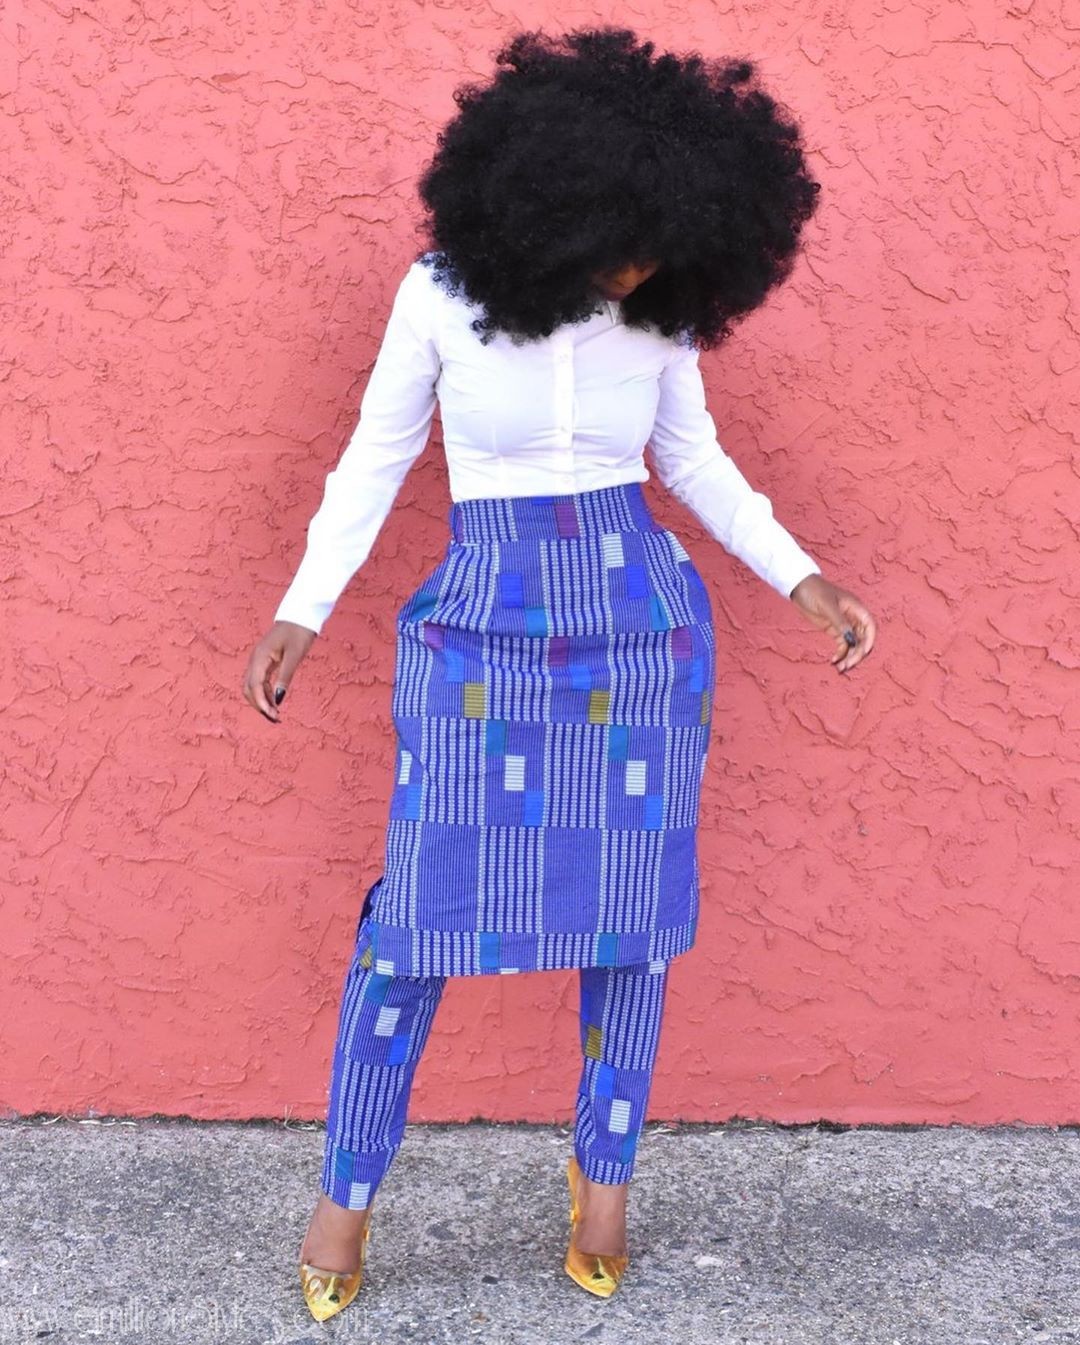 9 Unique Ankara Skirts That Studied In Harvard